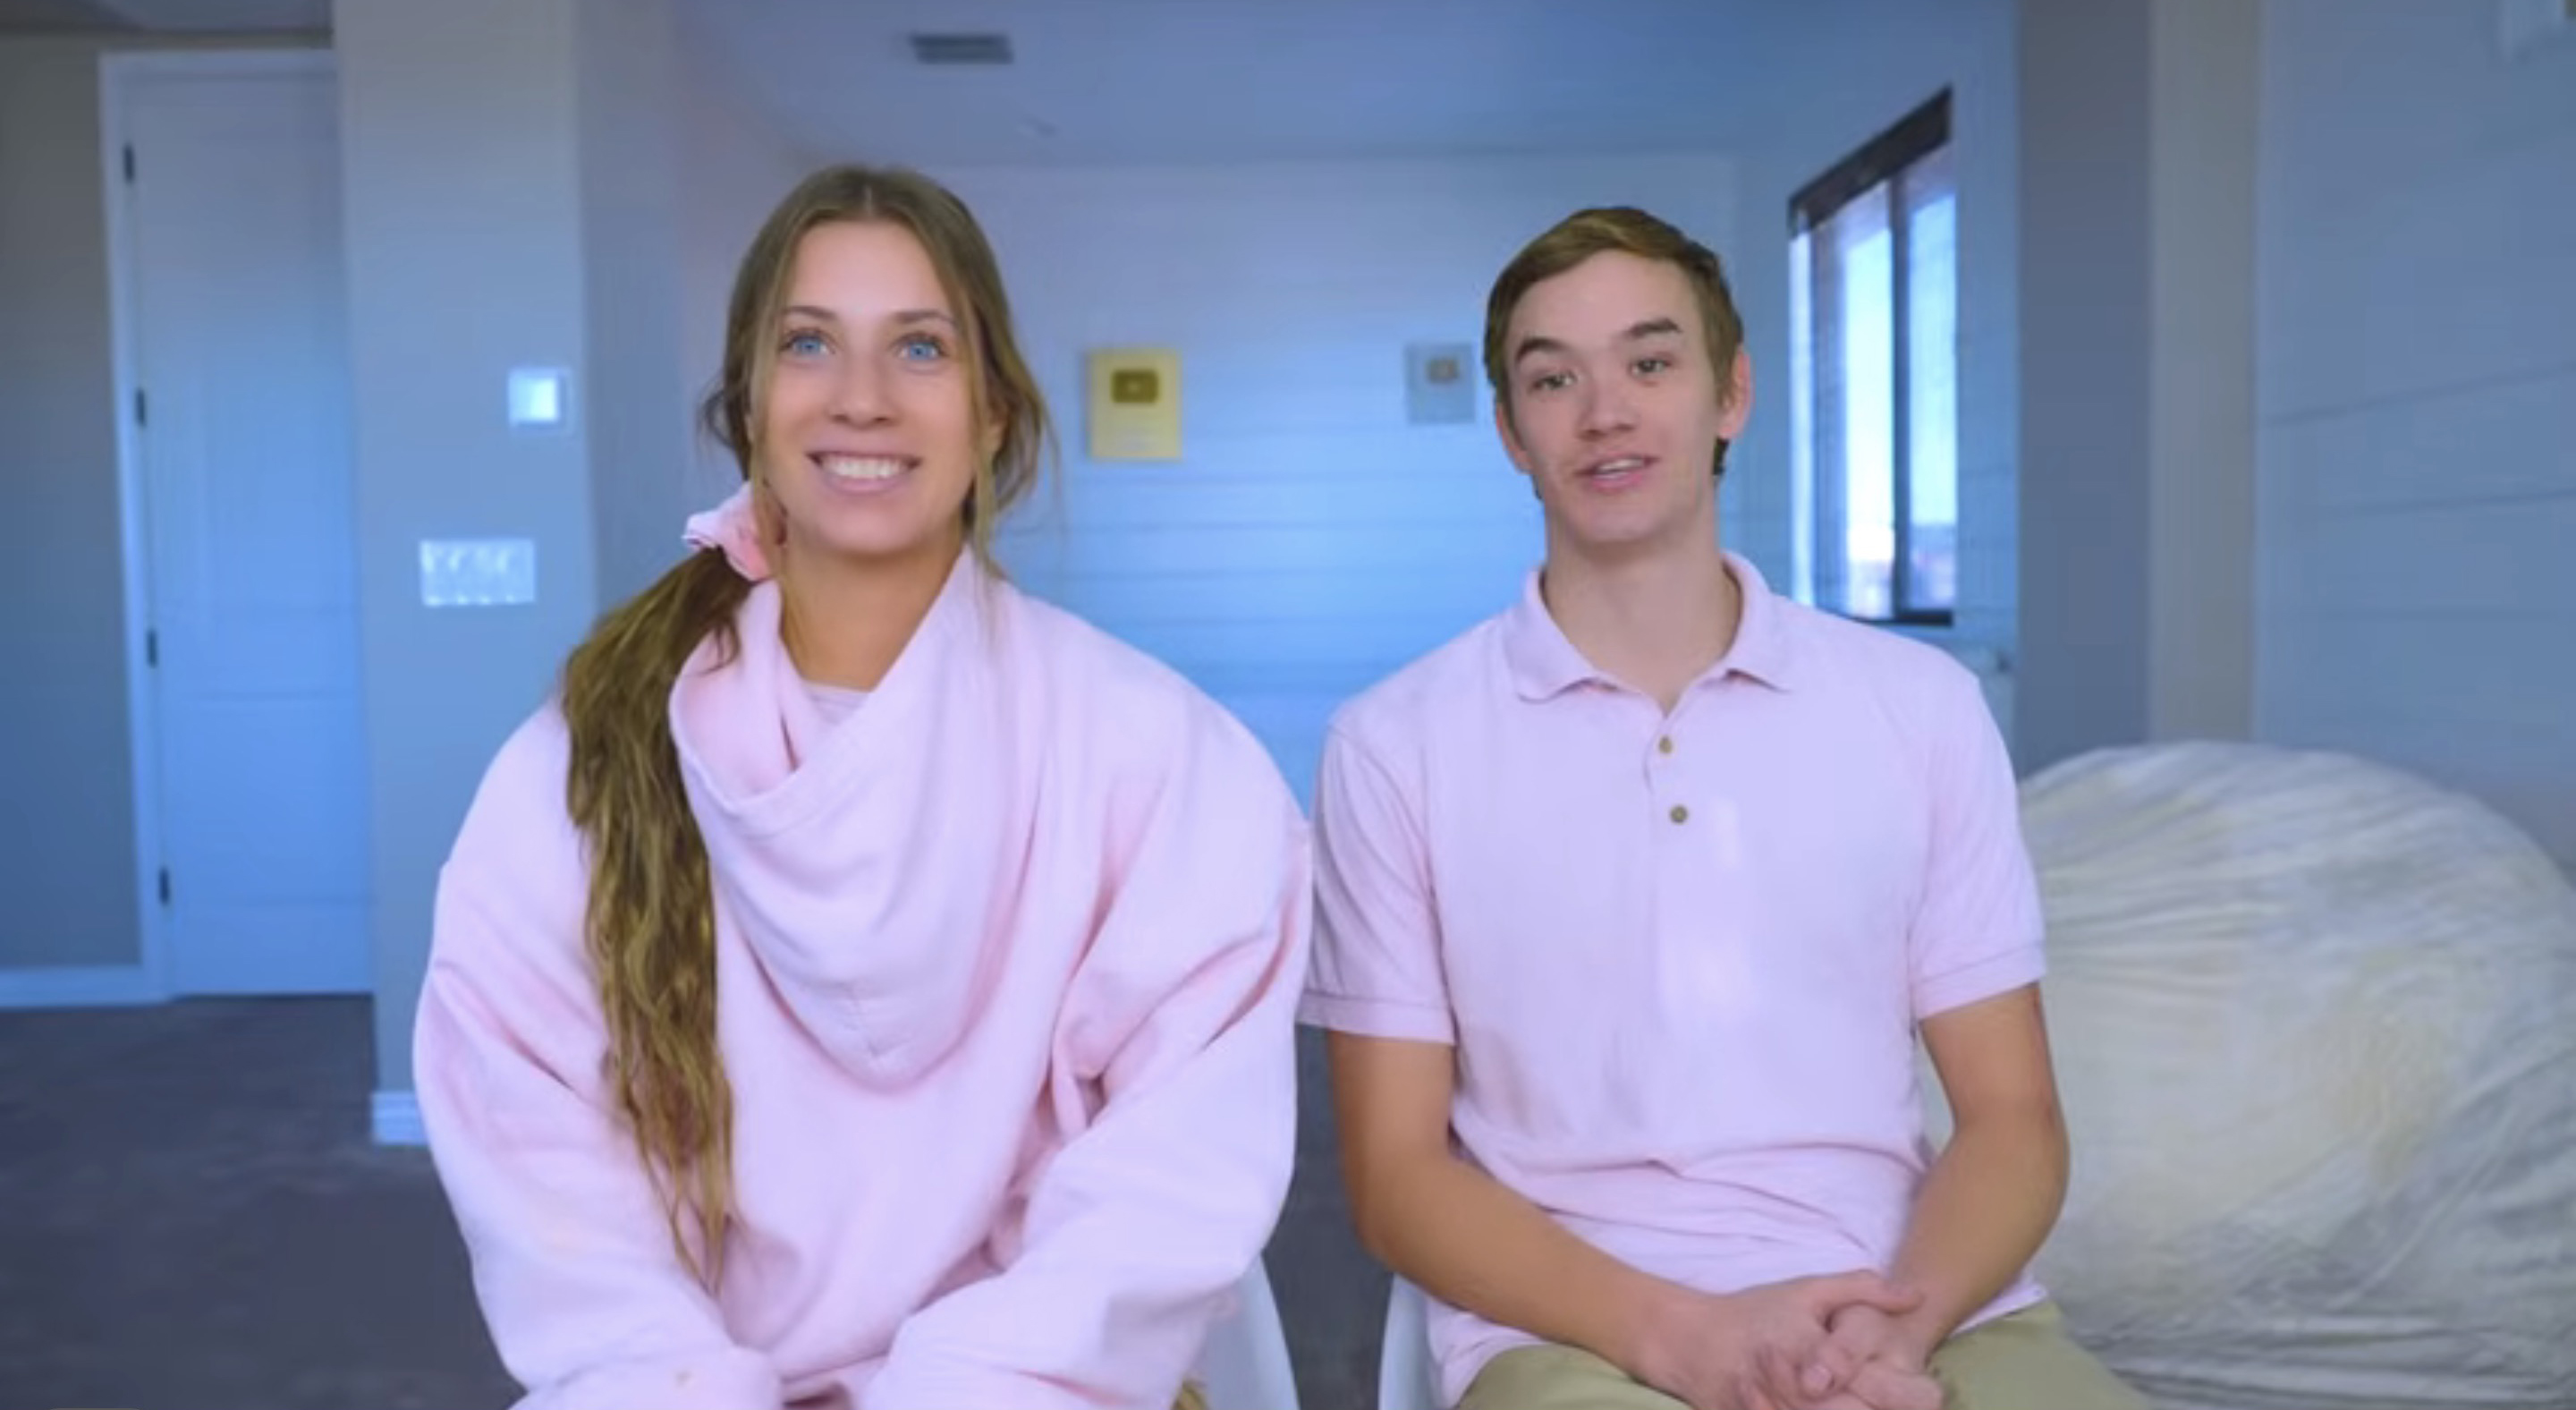 Cayden Christianson and Alyssa Eckstein have been creating content together since 2021